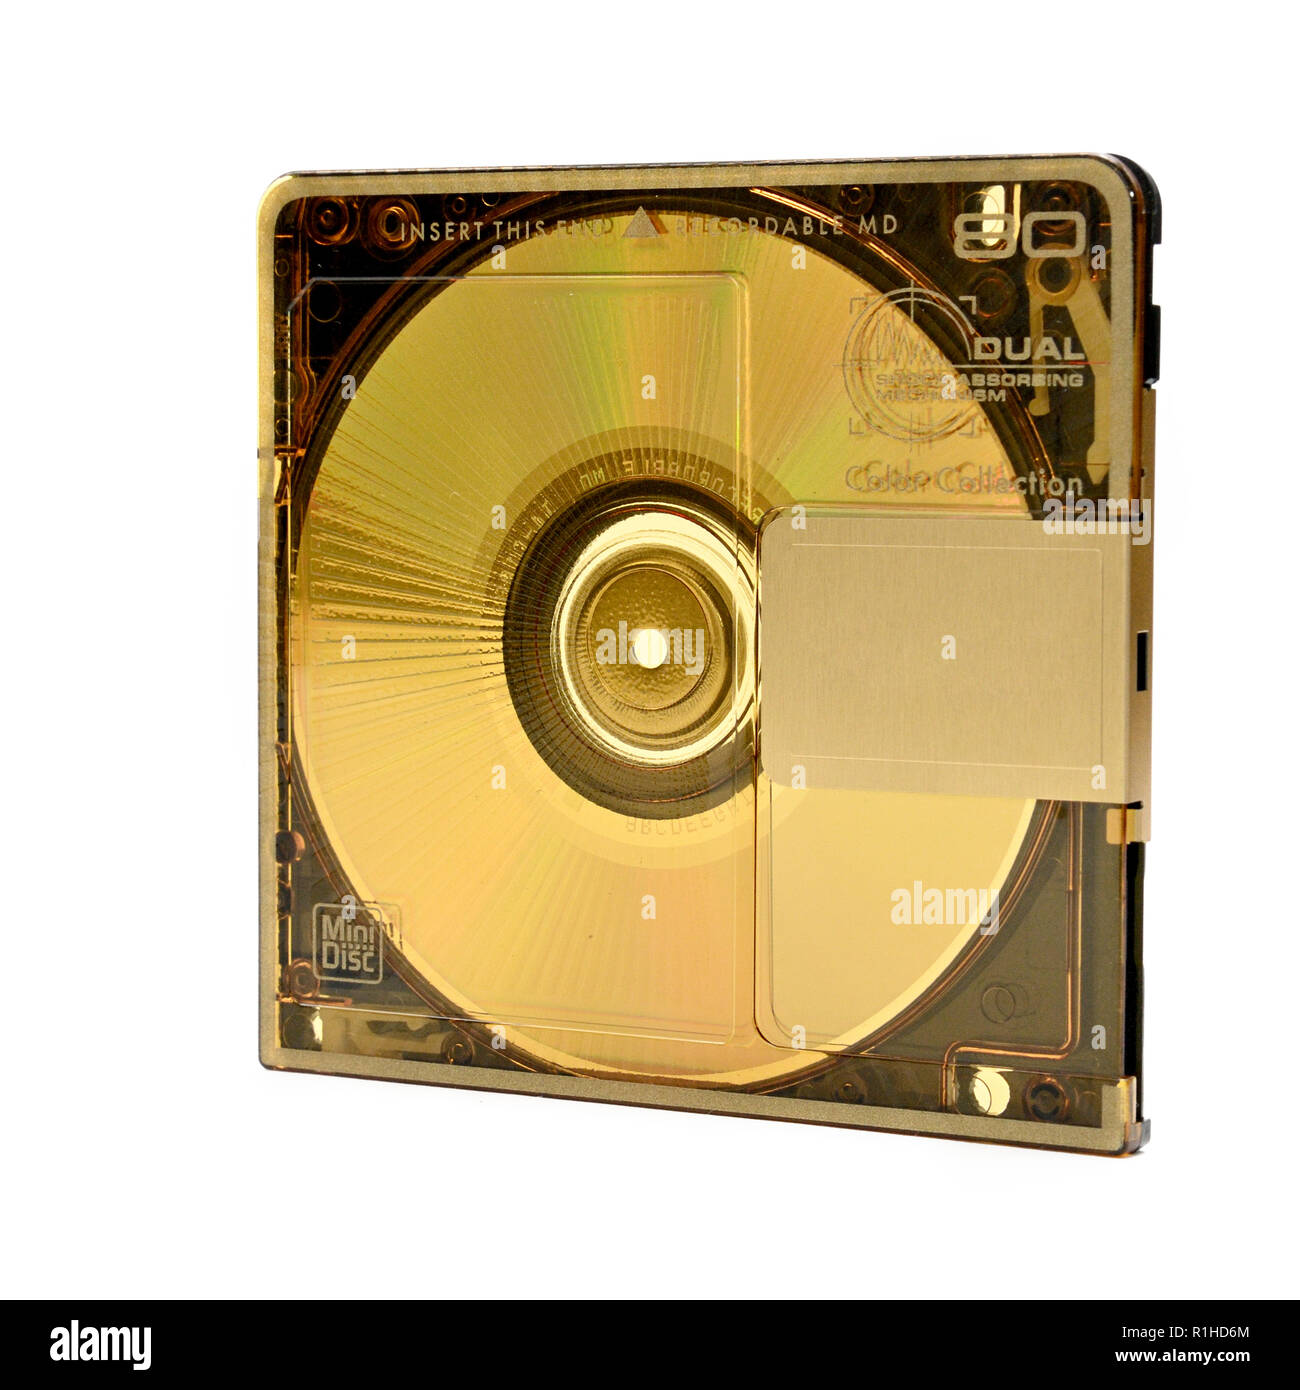 Compact rewritable Mini Disc- MD for digital recording released in the 90s on an isolated white background. Stock Photo